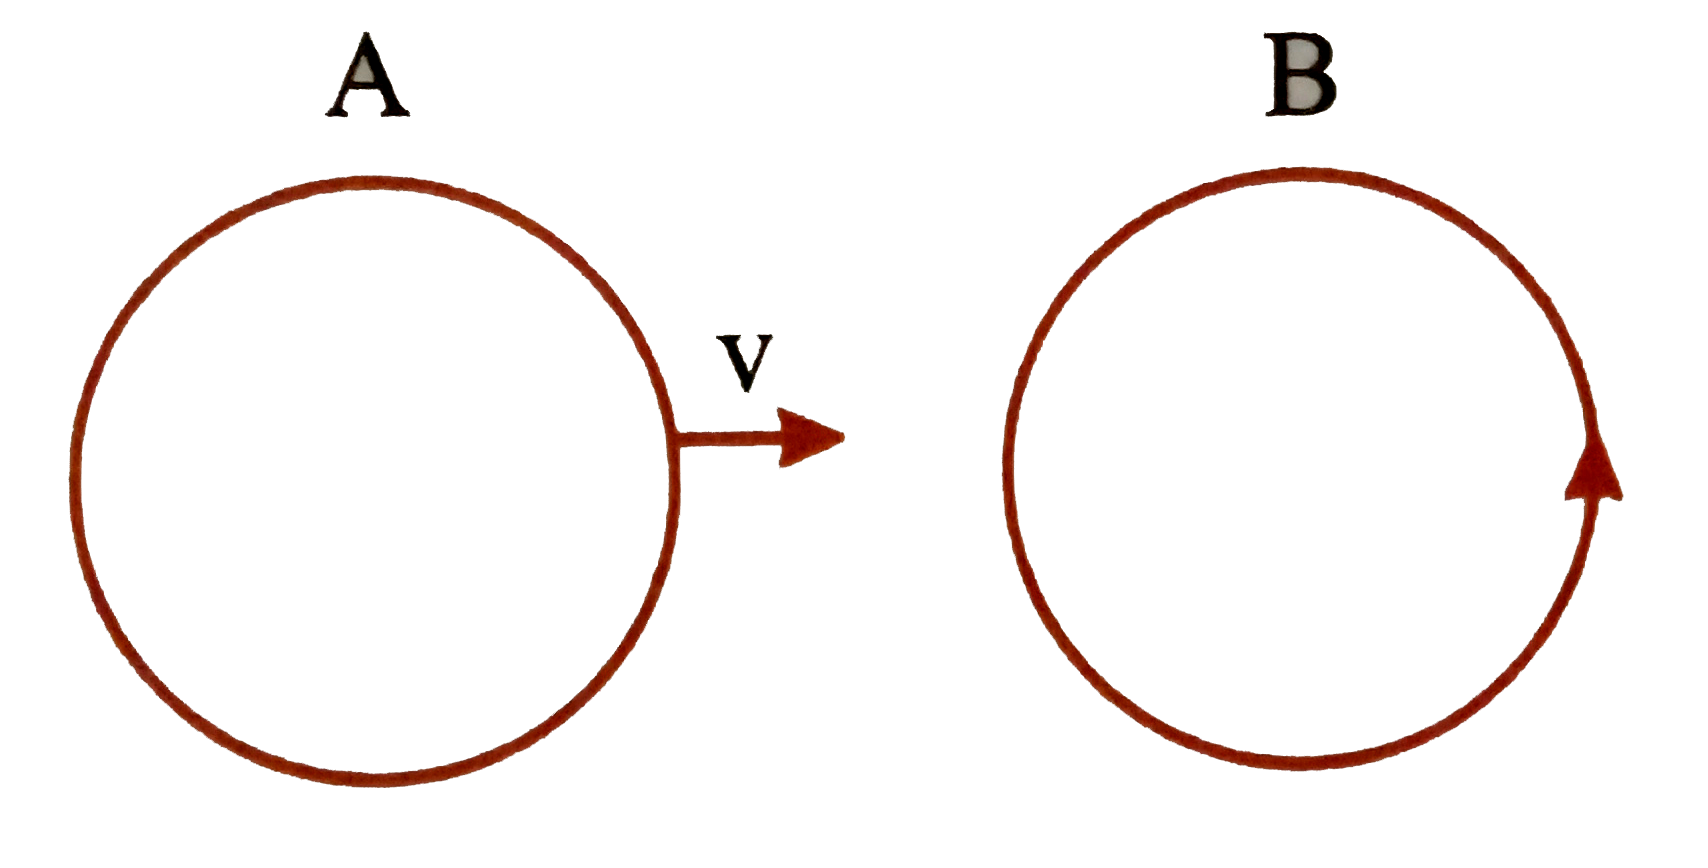 There are two coils A and B as shown in Figure. A current starts flowing in B as shown, when A is moved towards B and stops when A stops moving. The current in A is counterclockwise. B is kept stationary when A moves. We can infer that